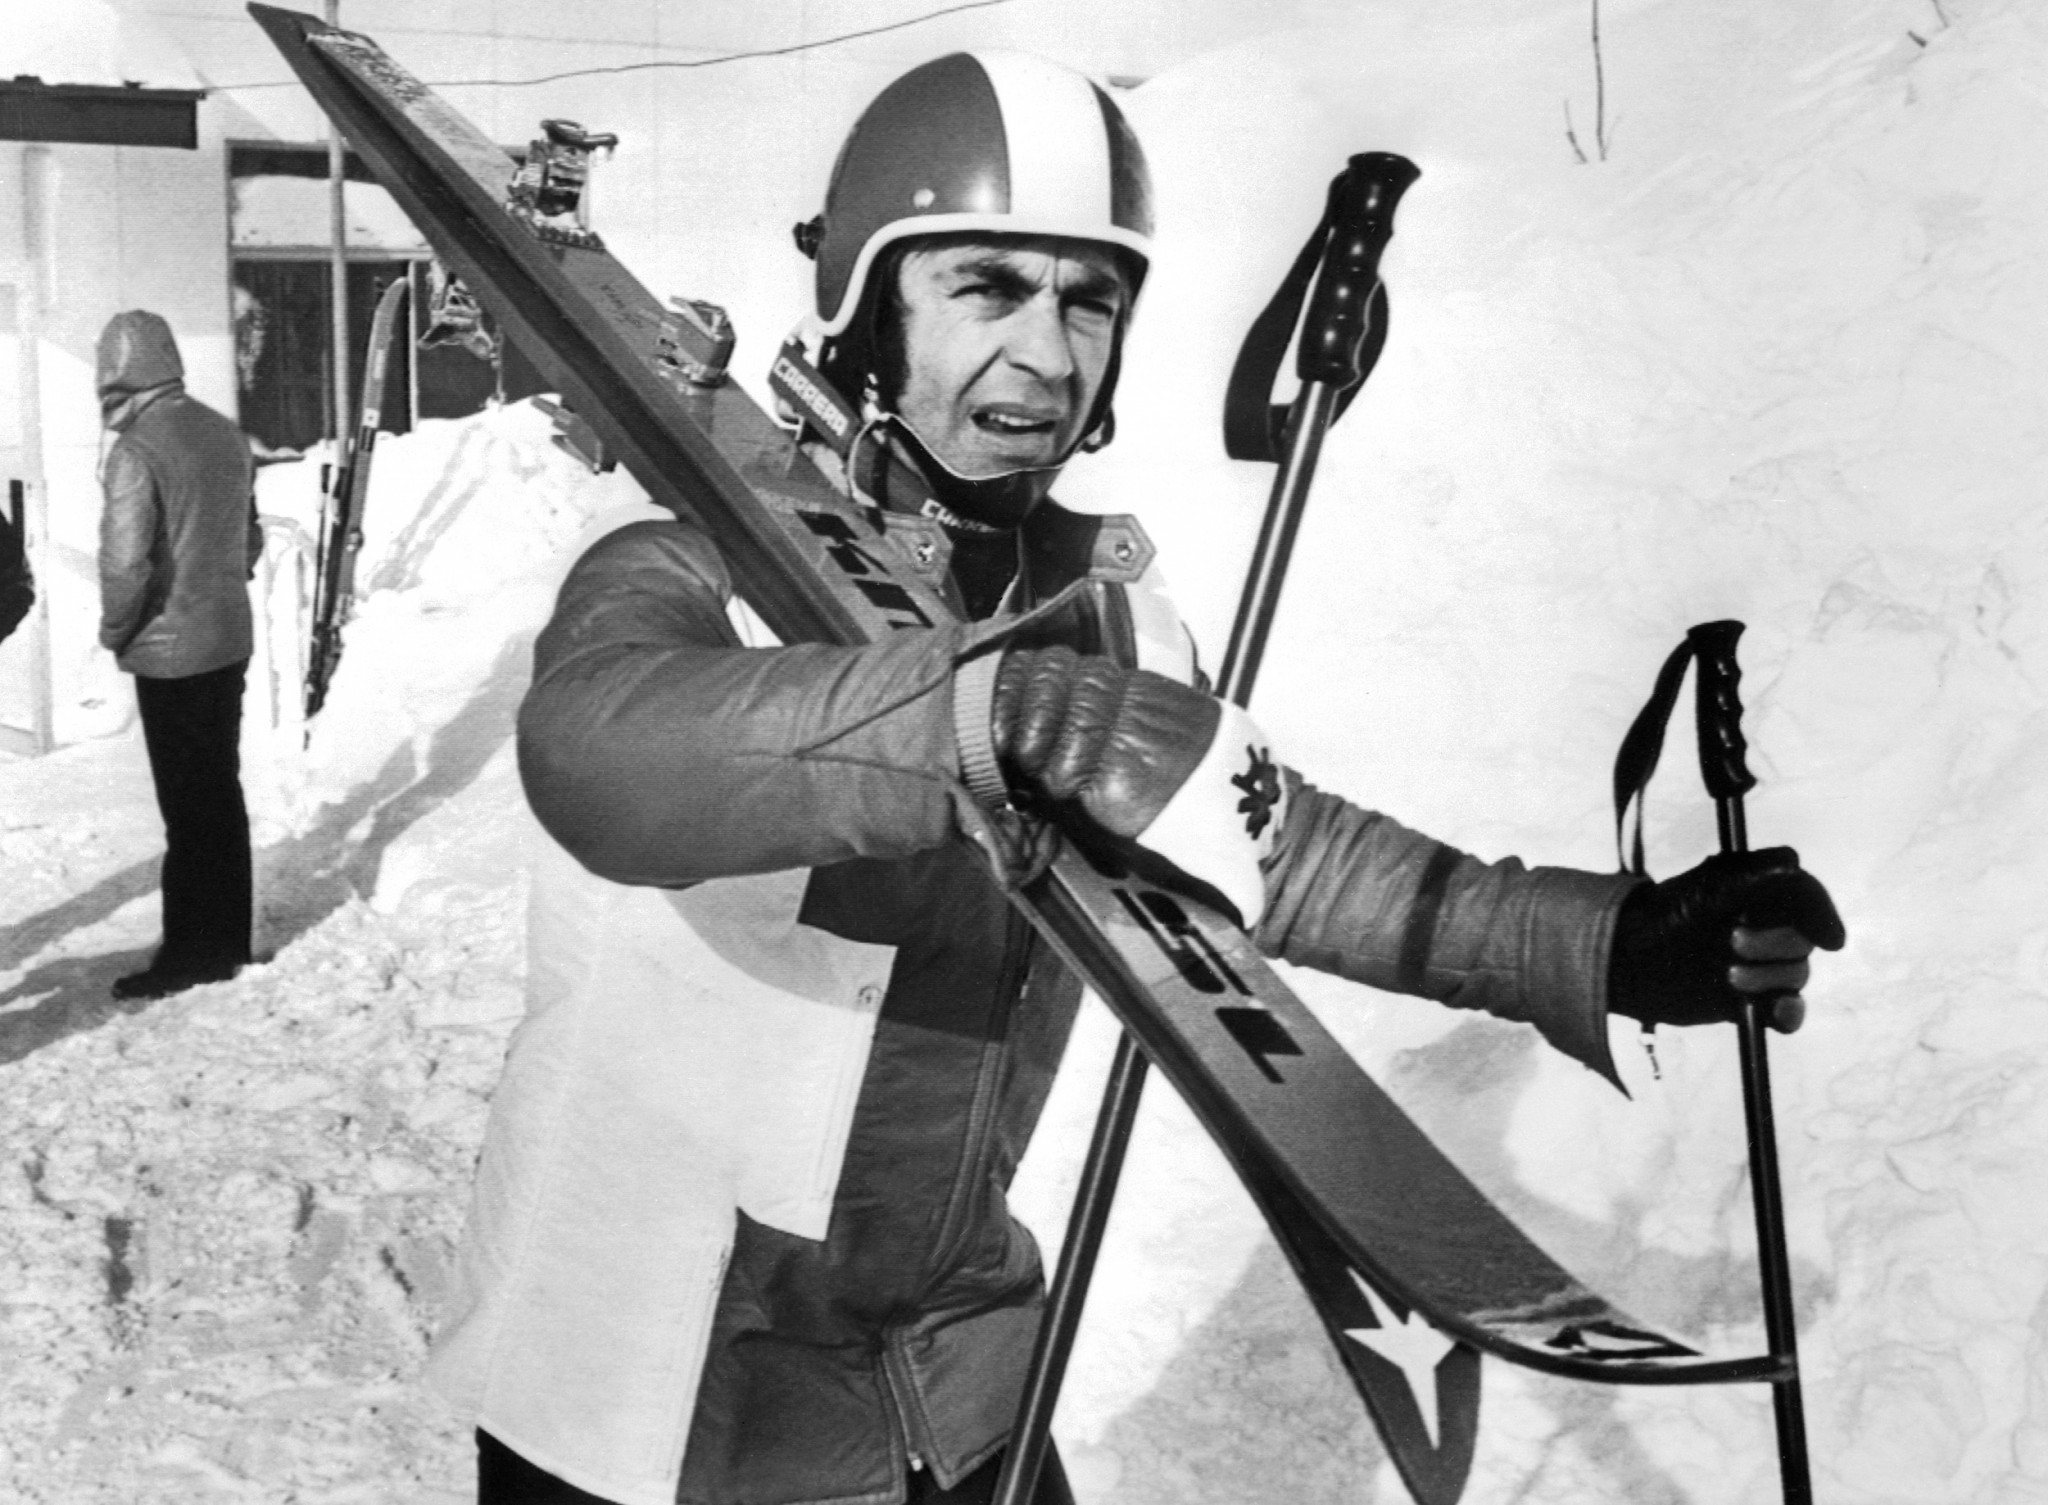 Austrian skier Karl Schranz, banned from the 1972 Winter Olympics, said "Brundage had his black list" ©Getty Images